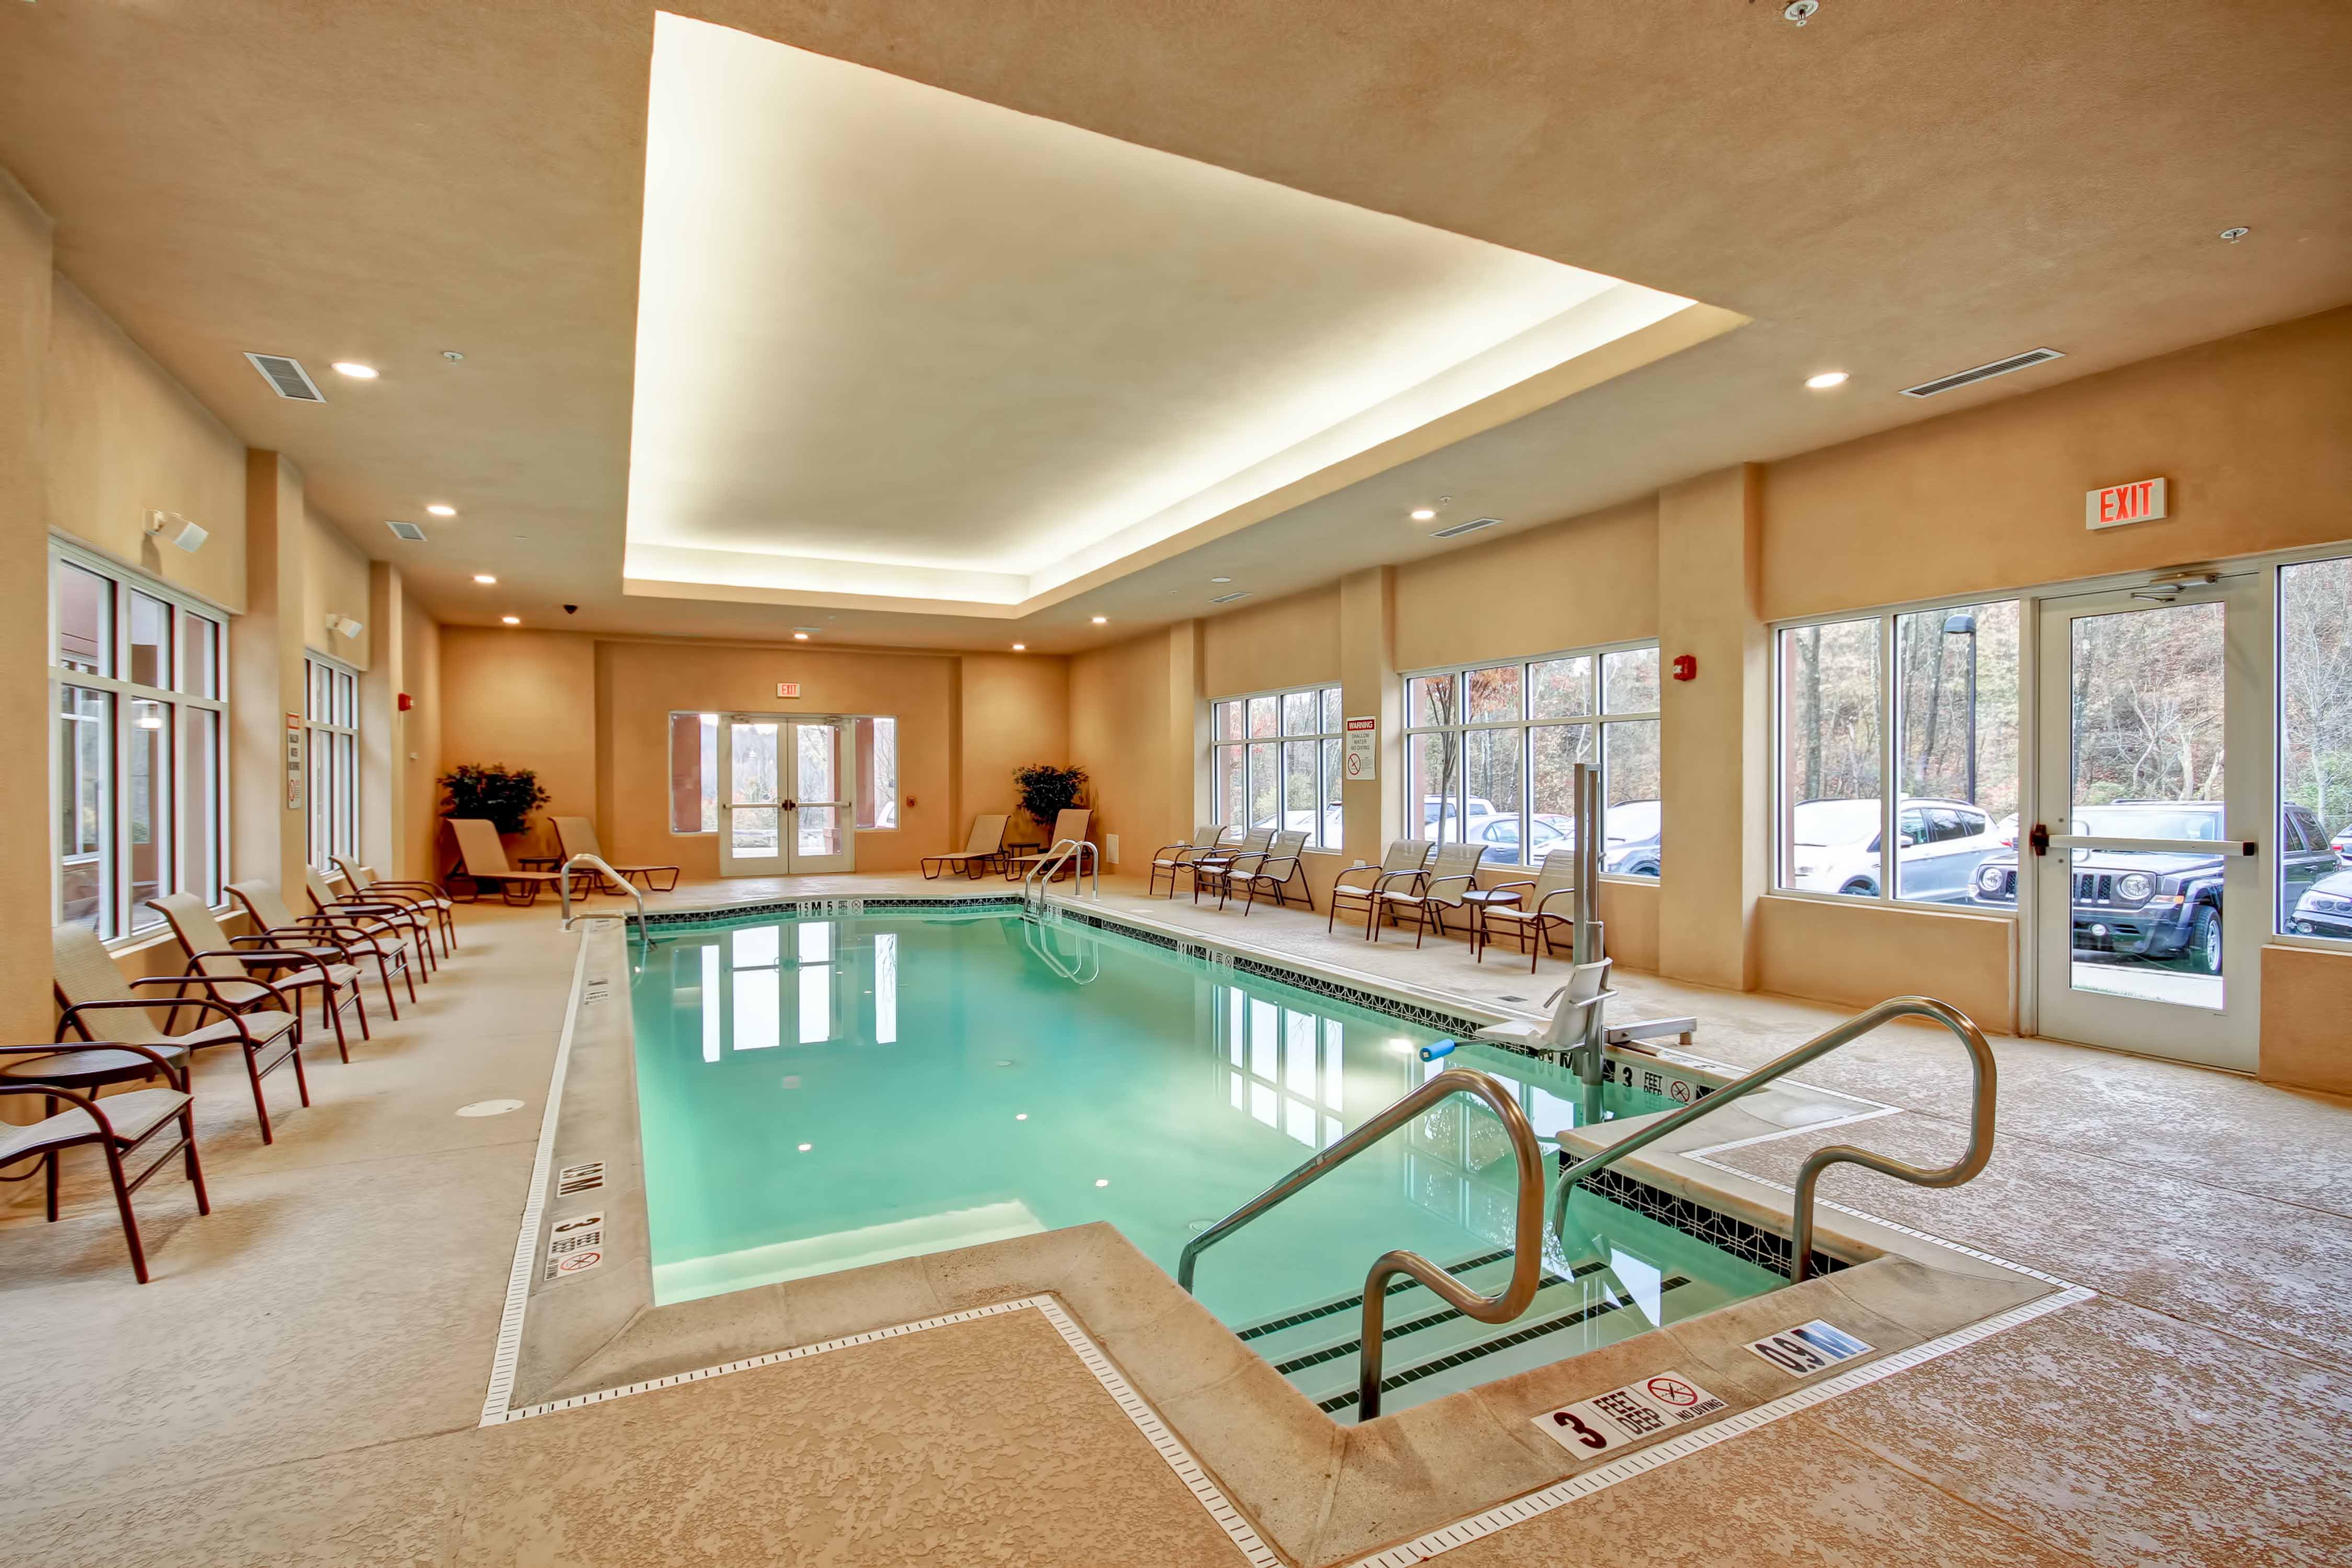 Indoor pool with lounge chairs and outdoor view through windows